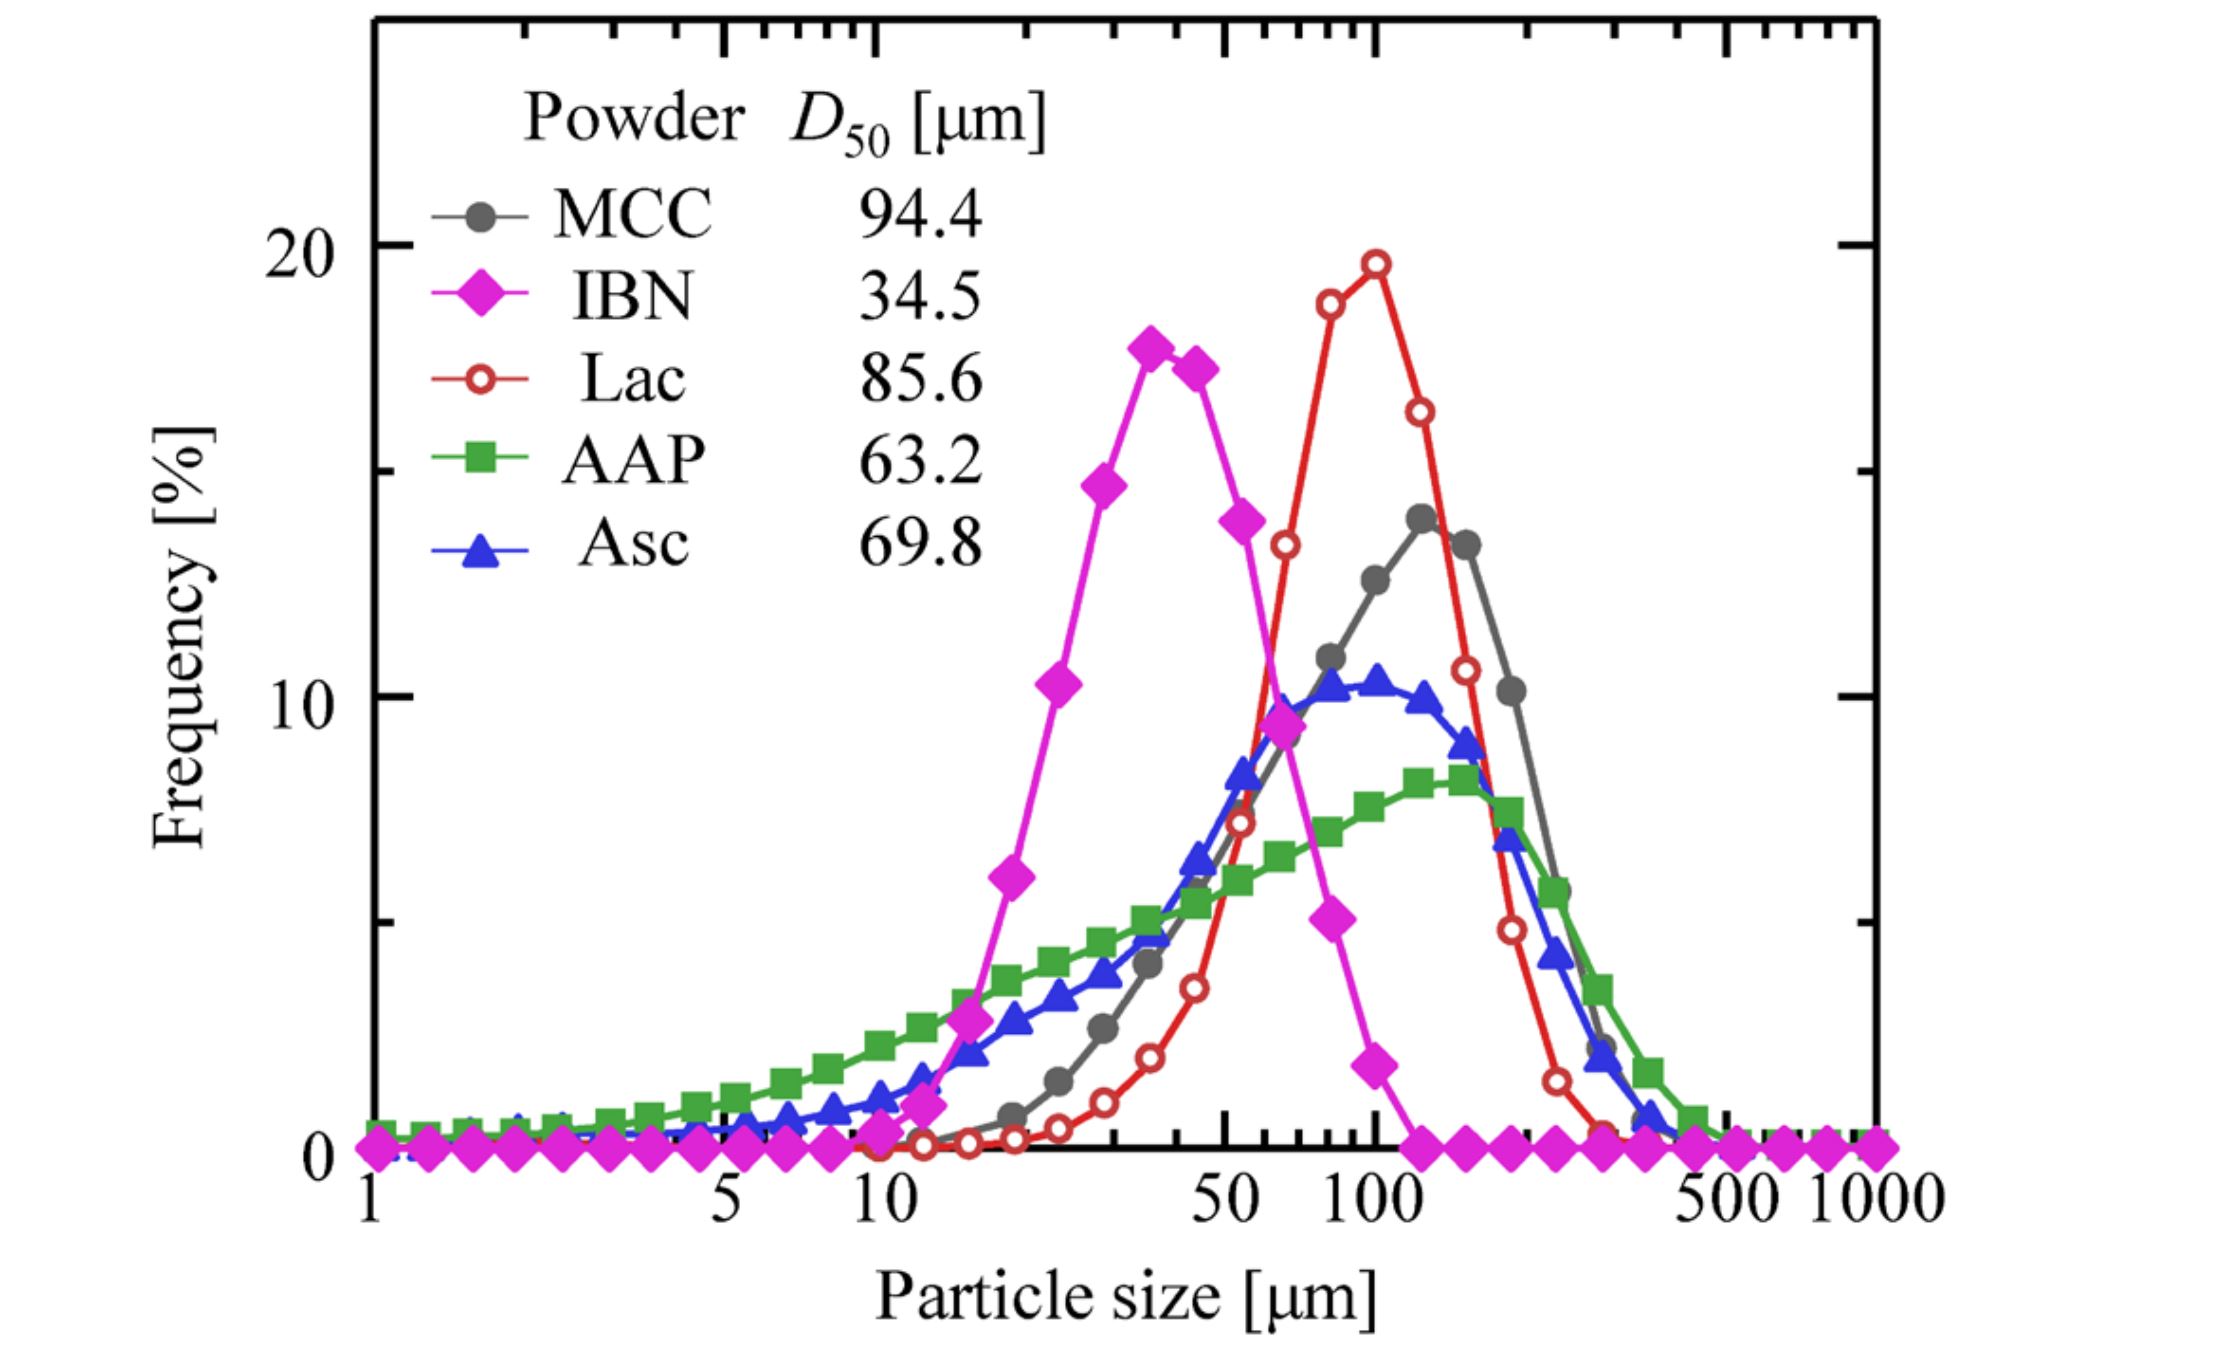 Fig. 1. Particle Size Distributions of Powders